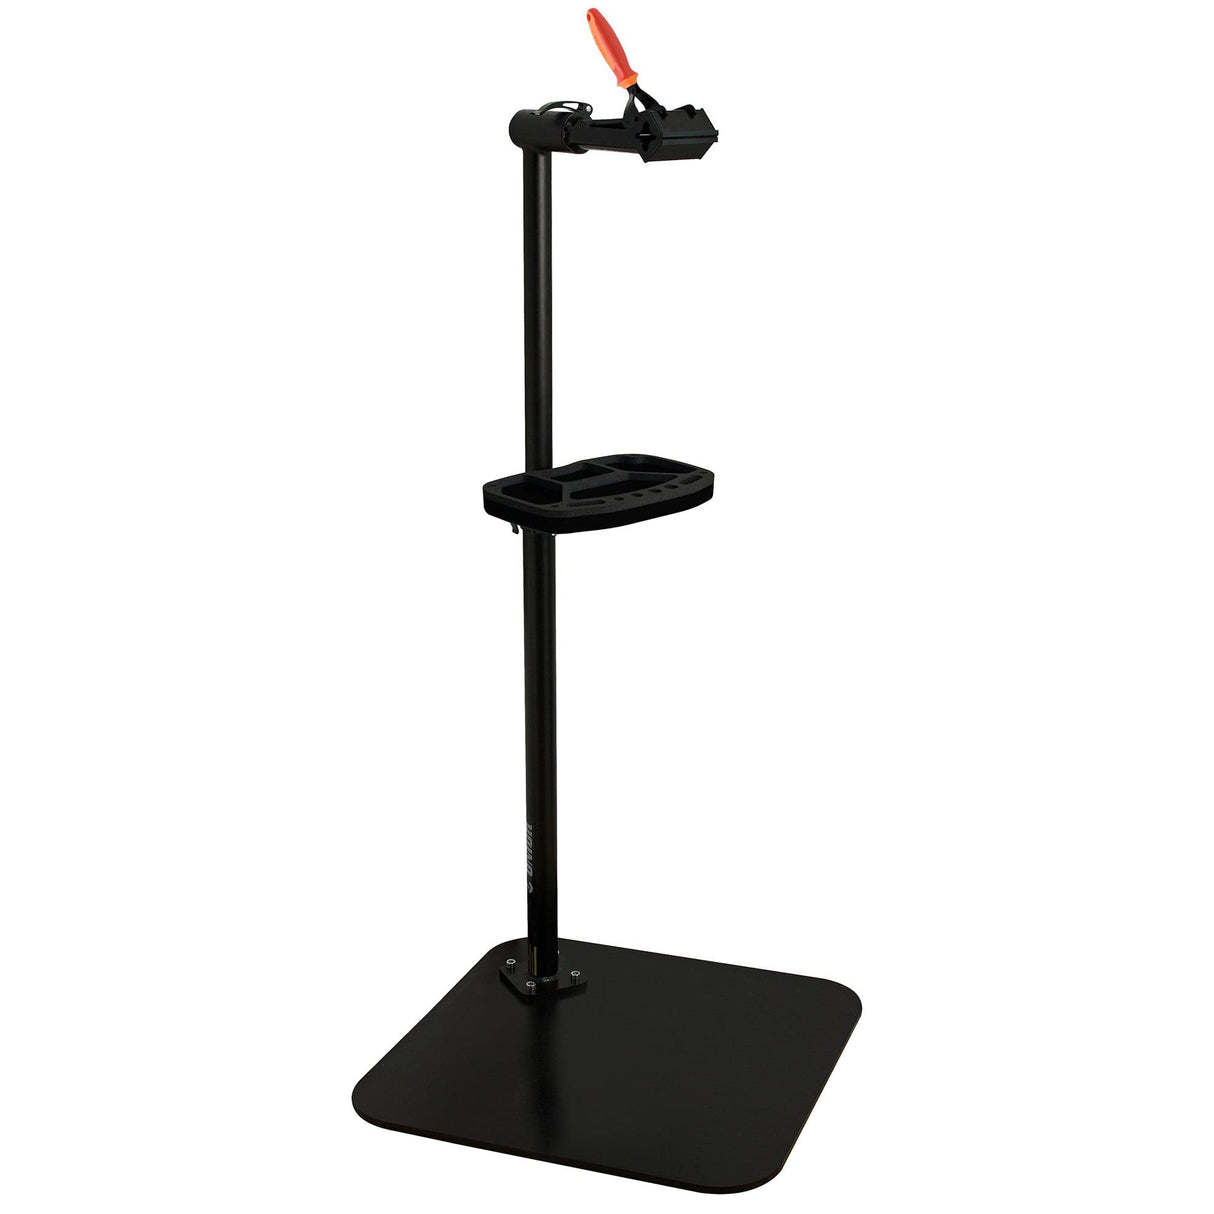 Unior Pro Repair Stand With Single Clamp, Manually Adjustable: Red